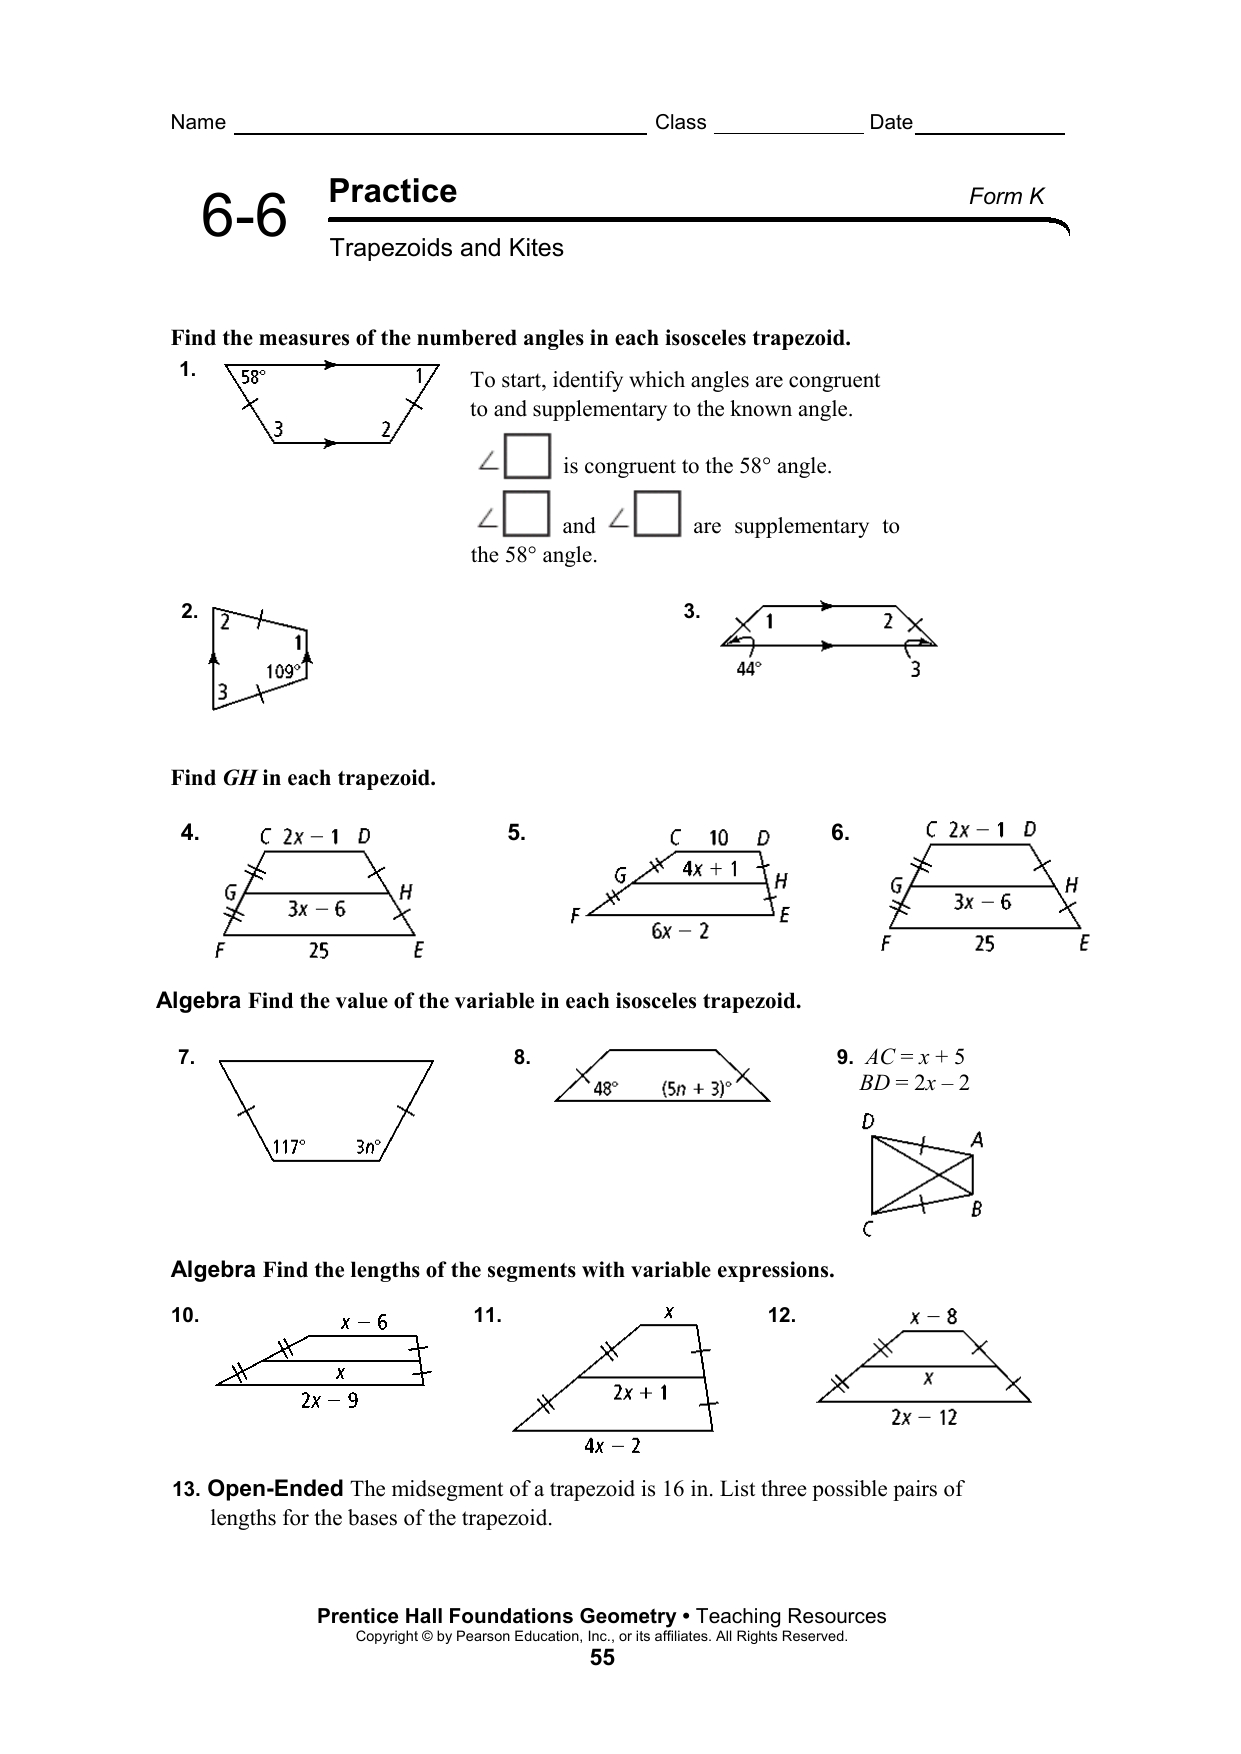 kites-and-trapezoids-worksheet-answers-db-excel